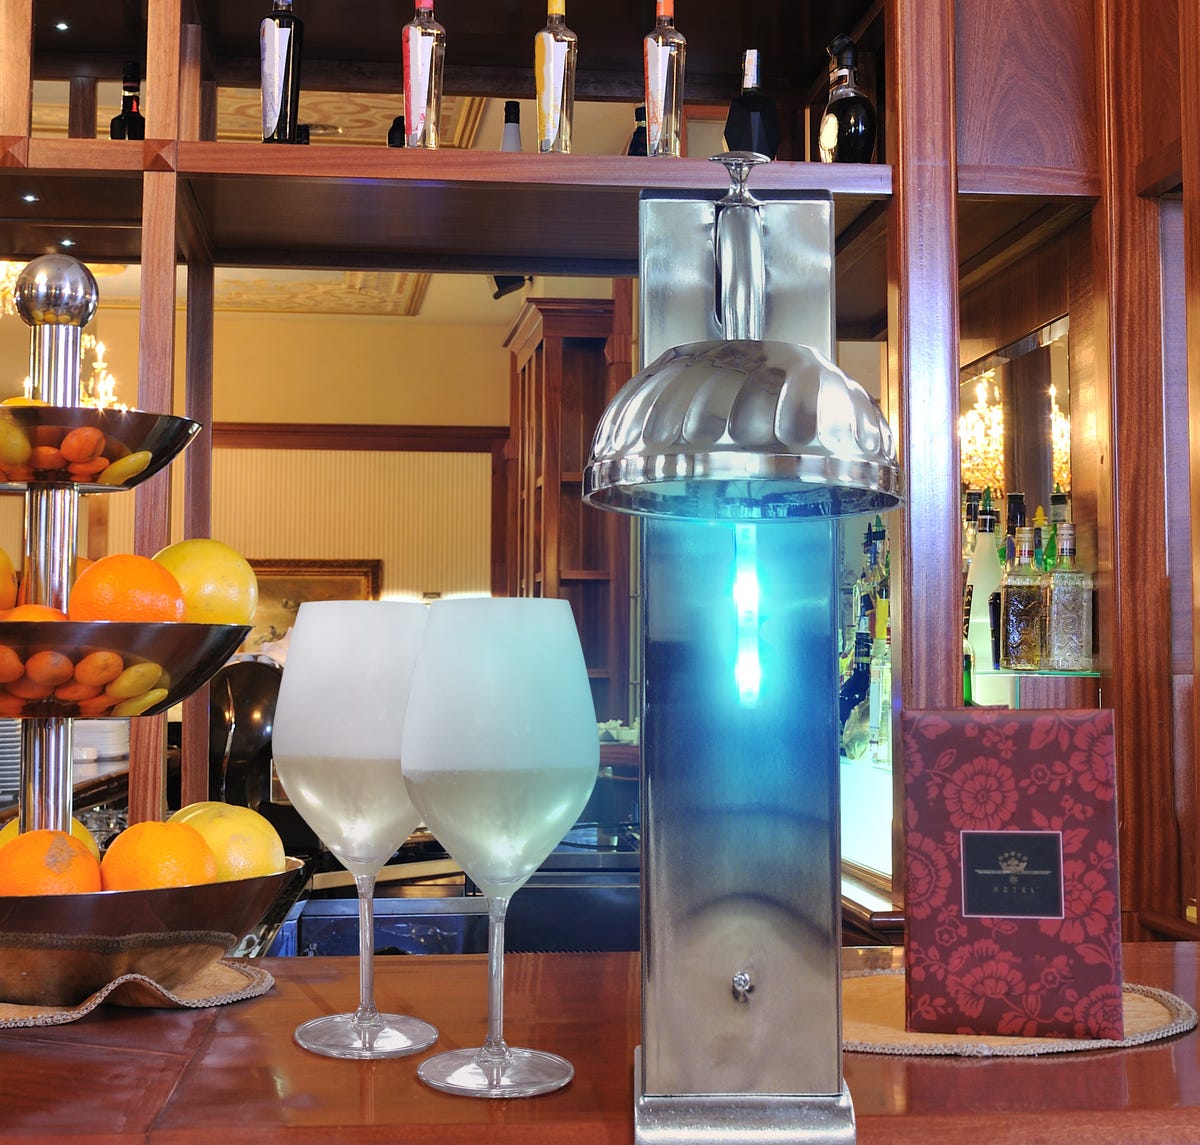 The Vinotemp Il Romanzo CO2 Glass Chiller adds that special touch when serving cold drinks.